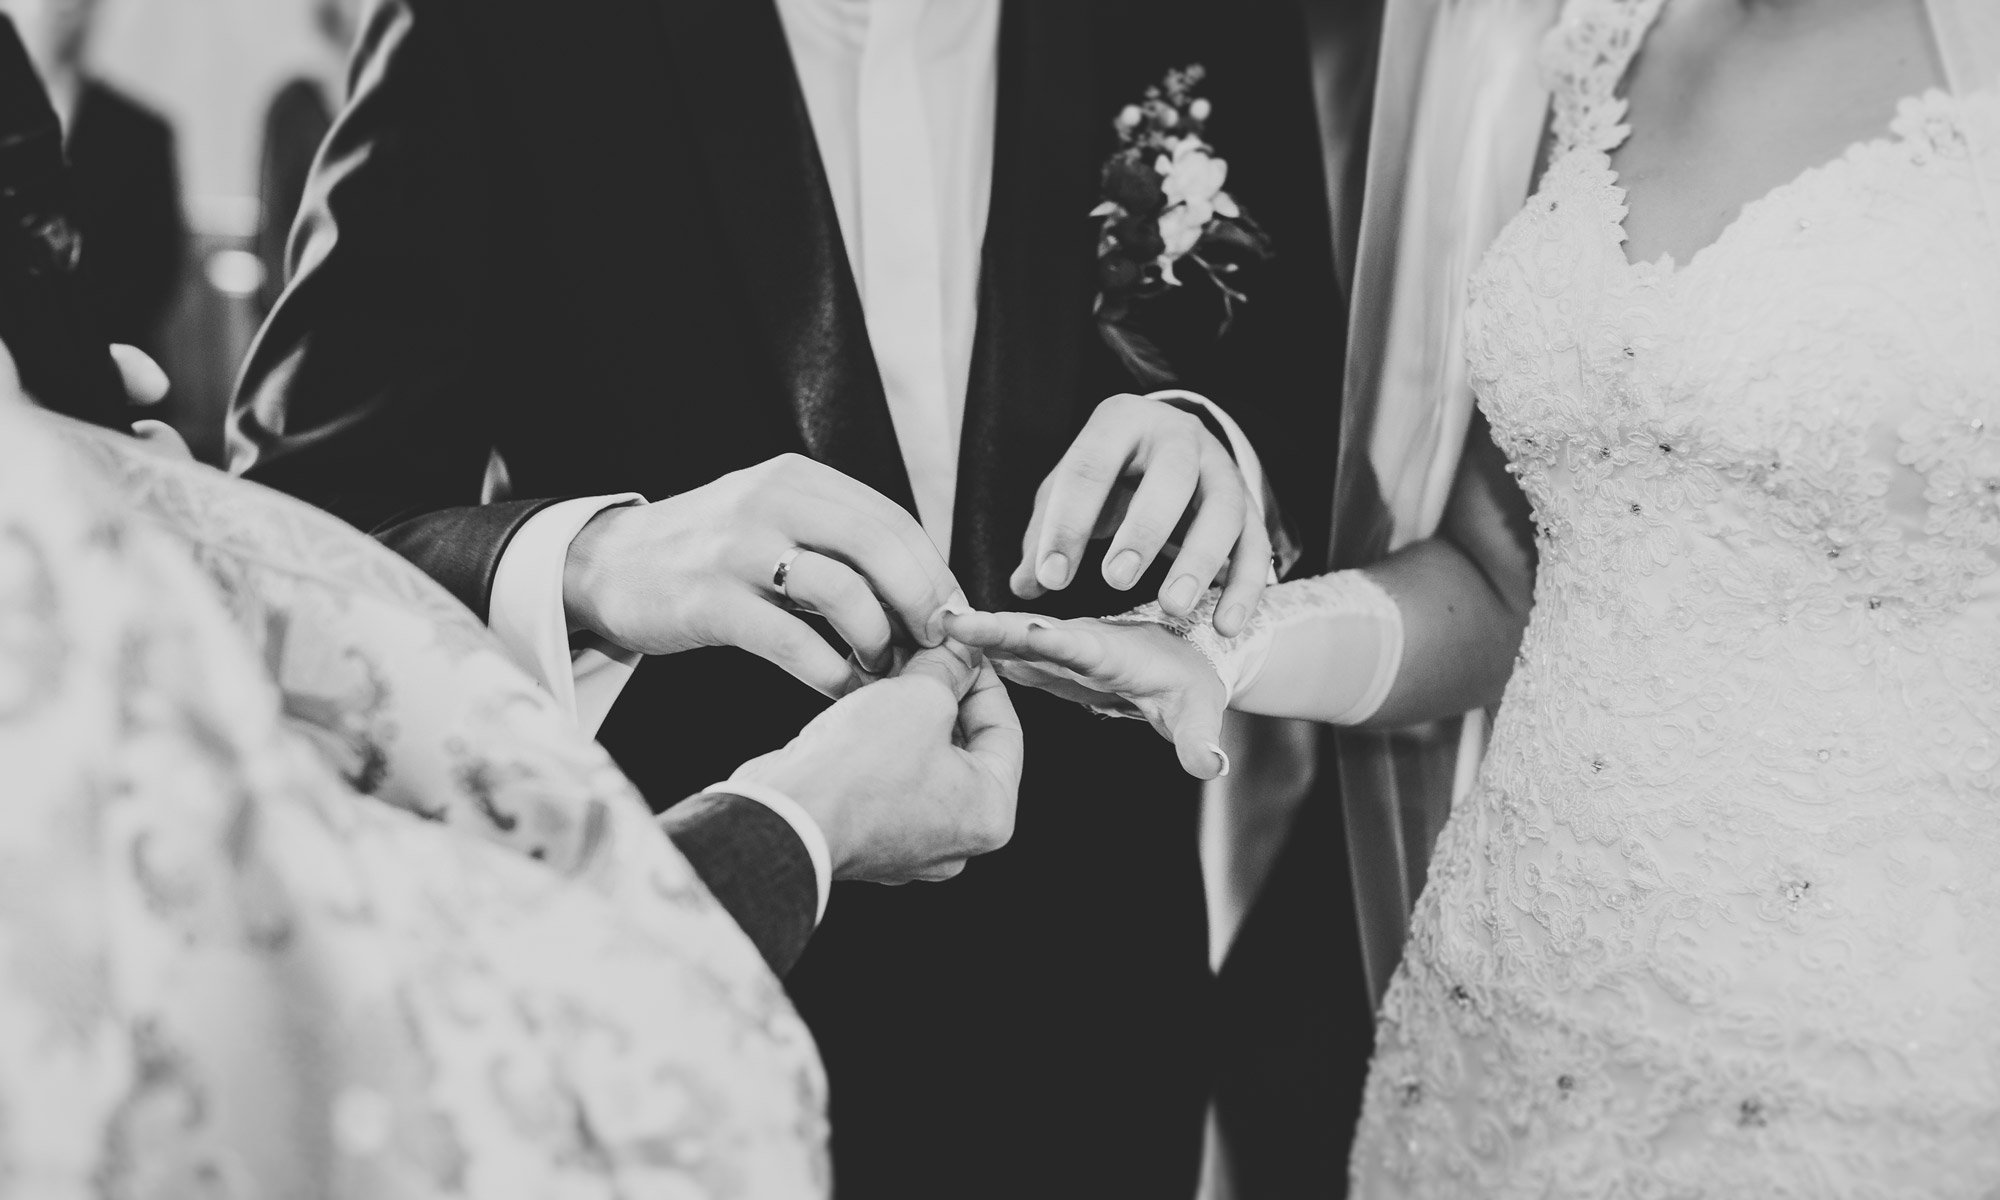 The Ceremony: Tips for Choosing a Venue and Officiant